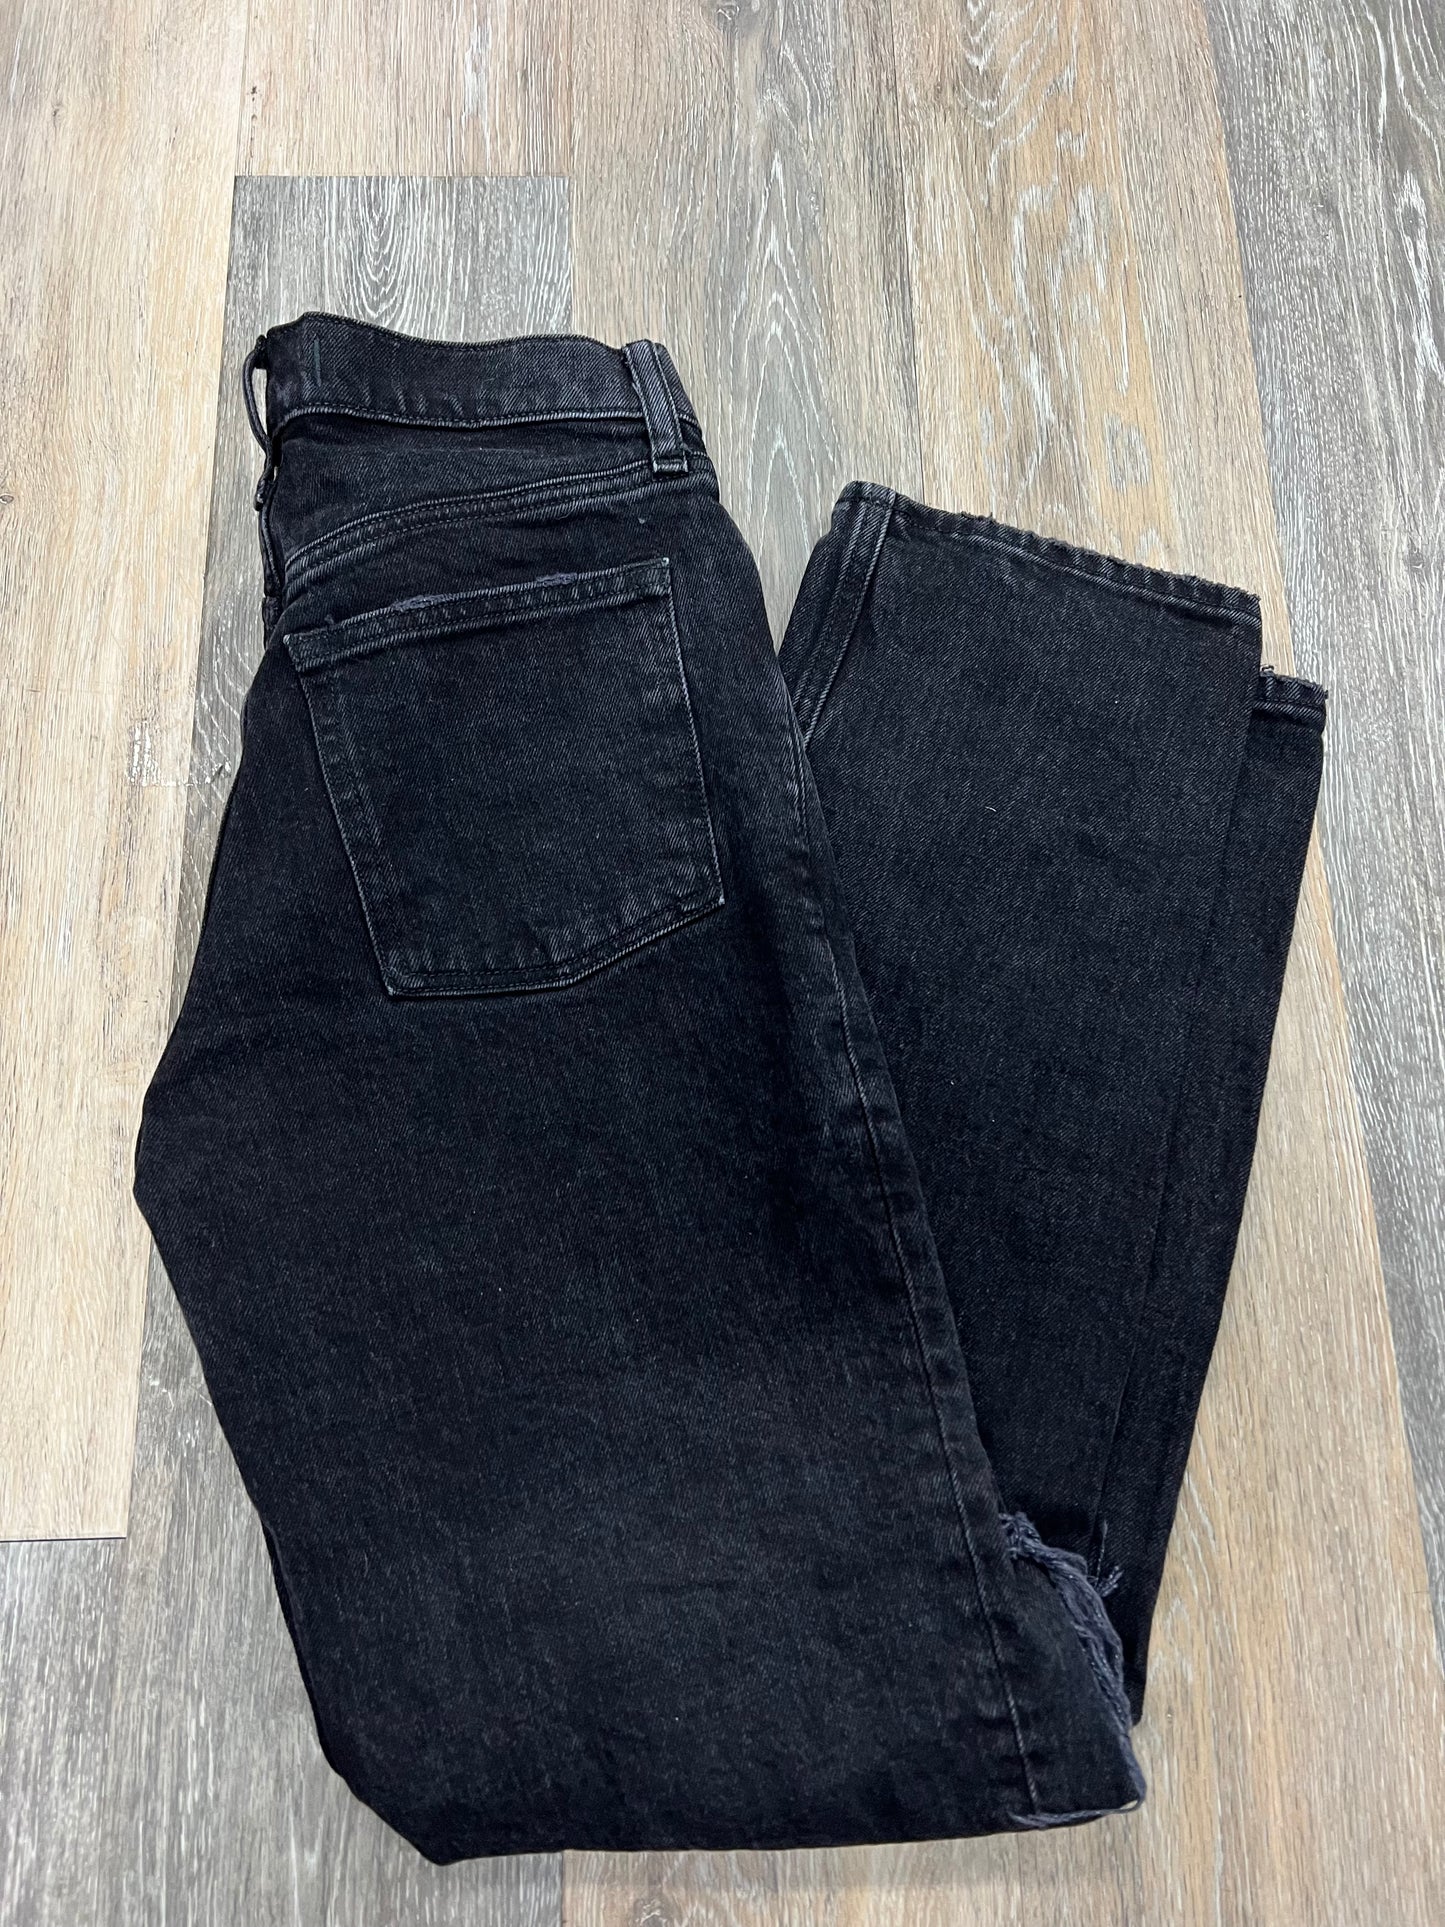 Jeans Straight By Abercrombie And Fitch  Size: 2/26